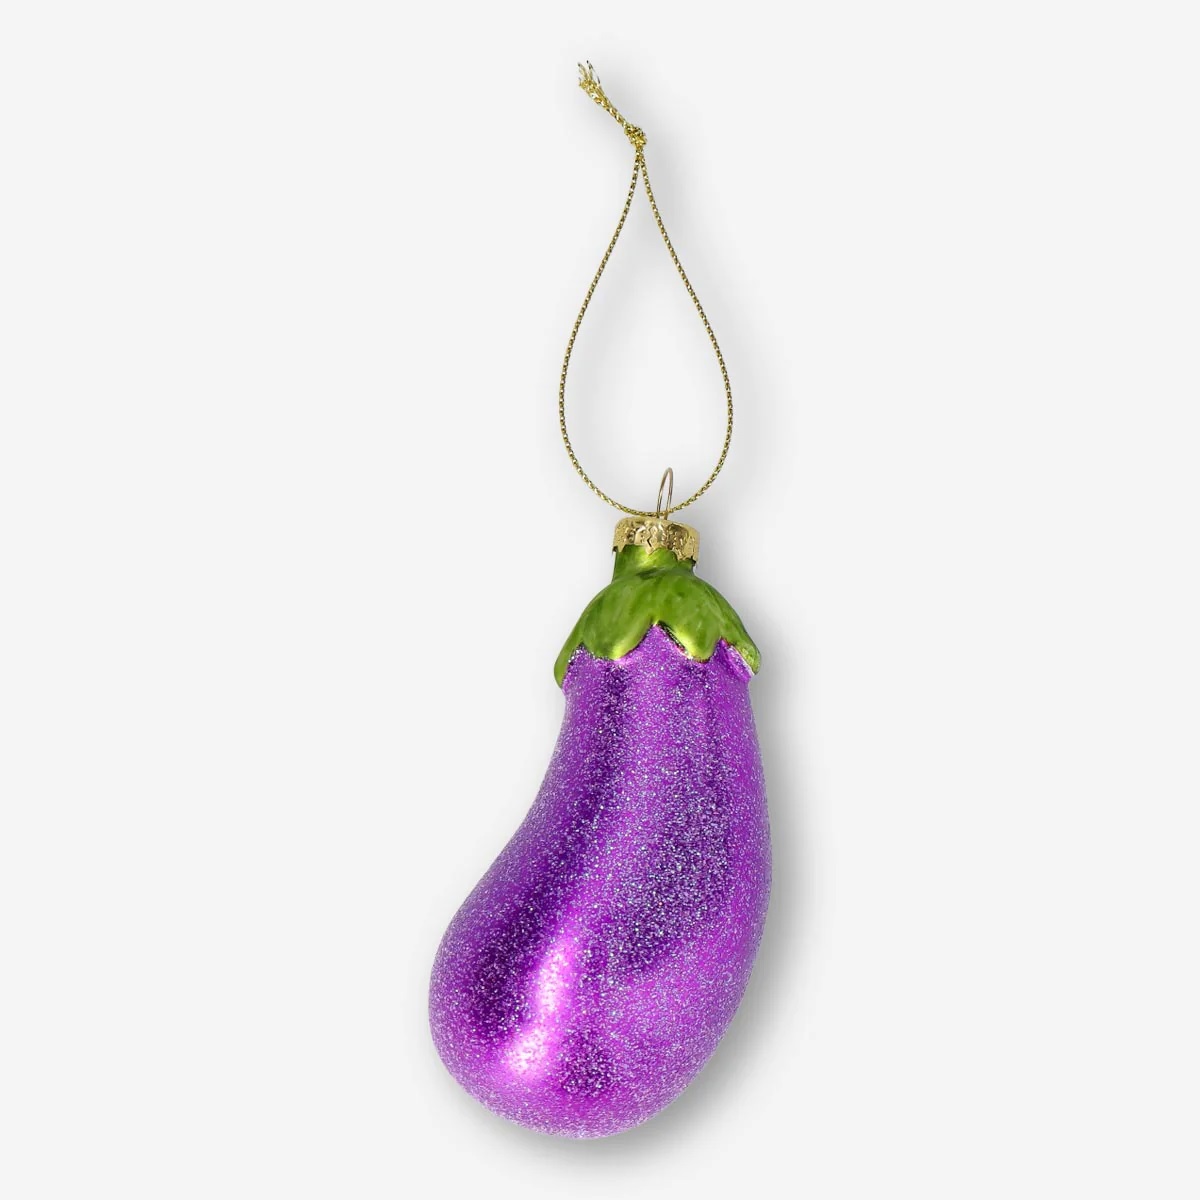 Flying Tiger has some quirky baubles including this aubergine one